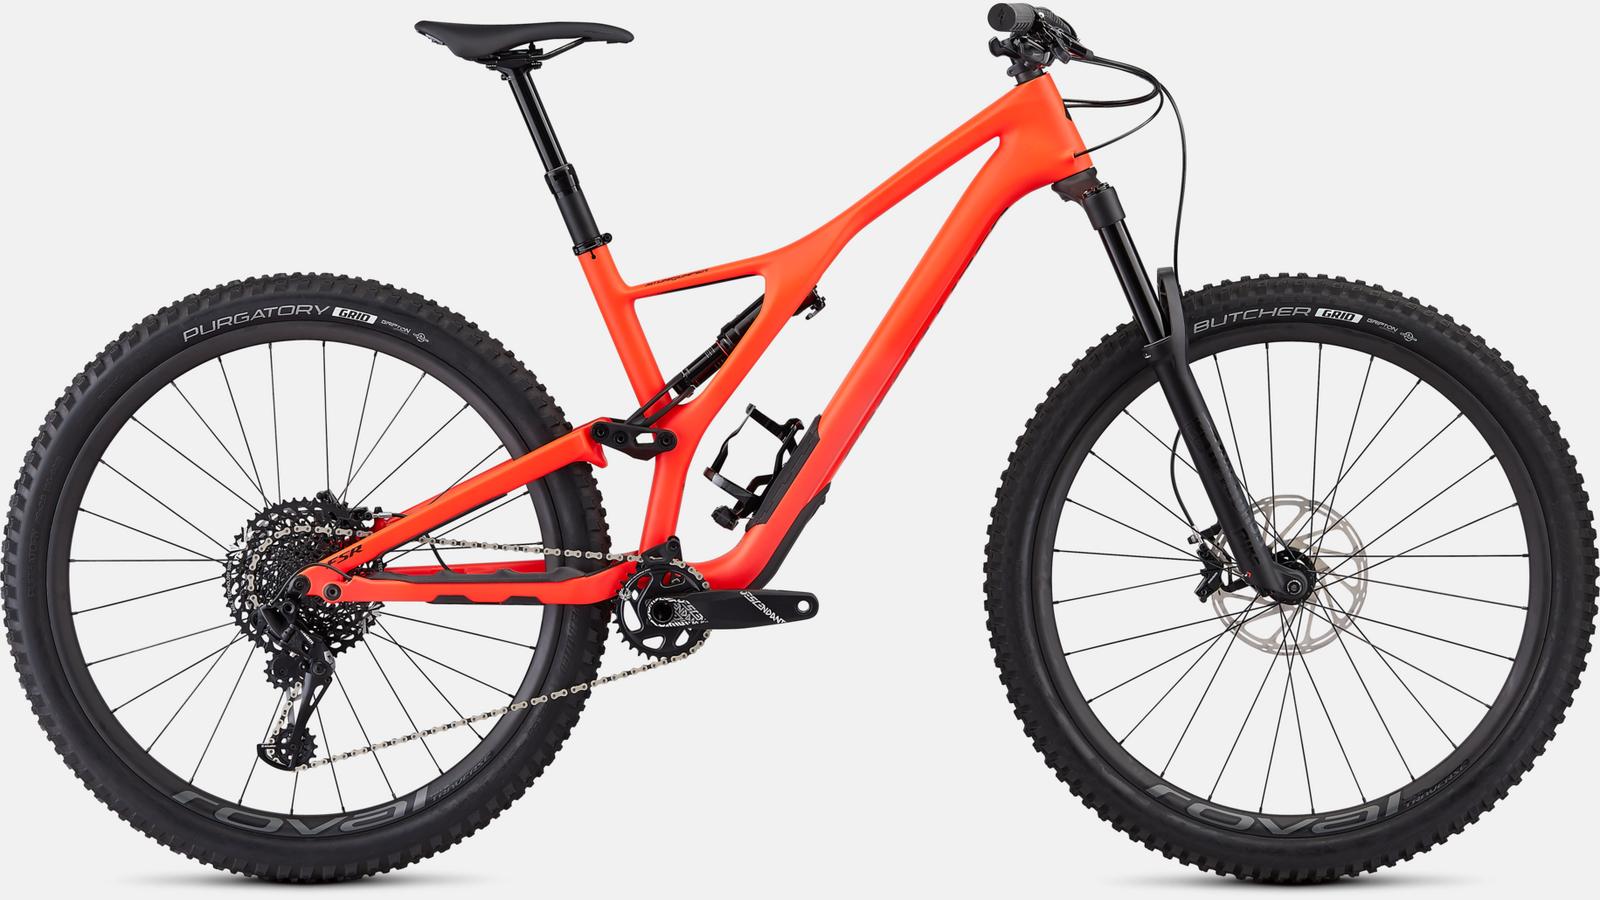 Touch-up paint for 2018 Specialized Men's Stumpjumper Expert 29 - Satin Rocket Red